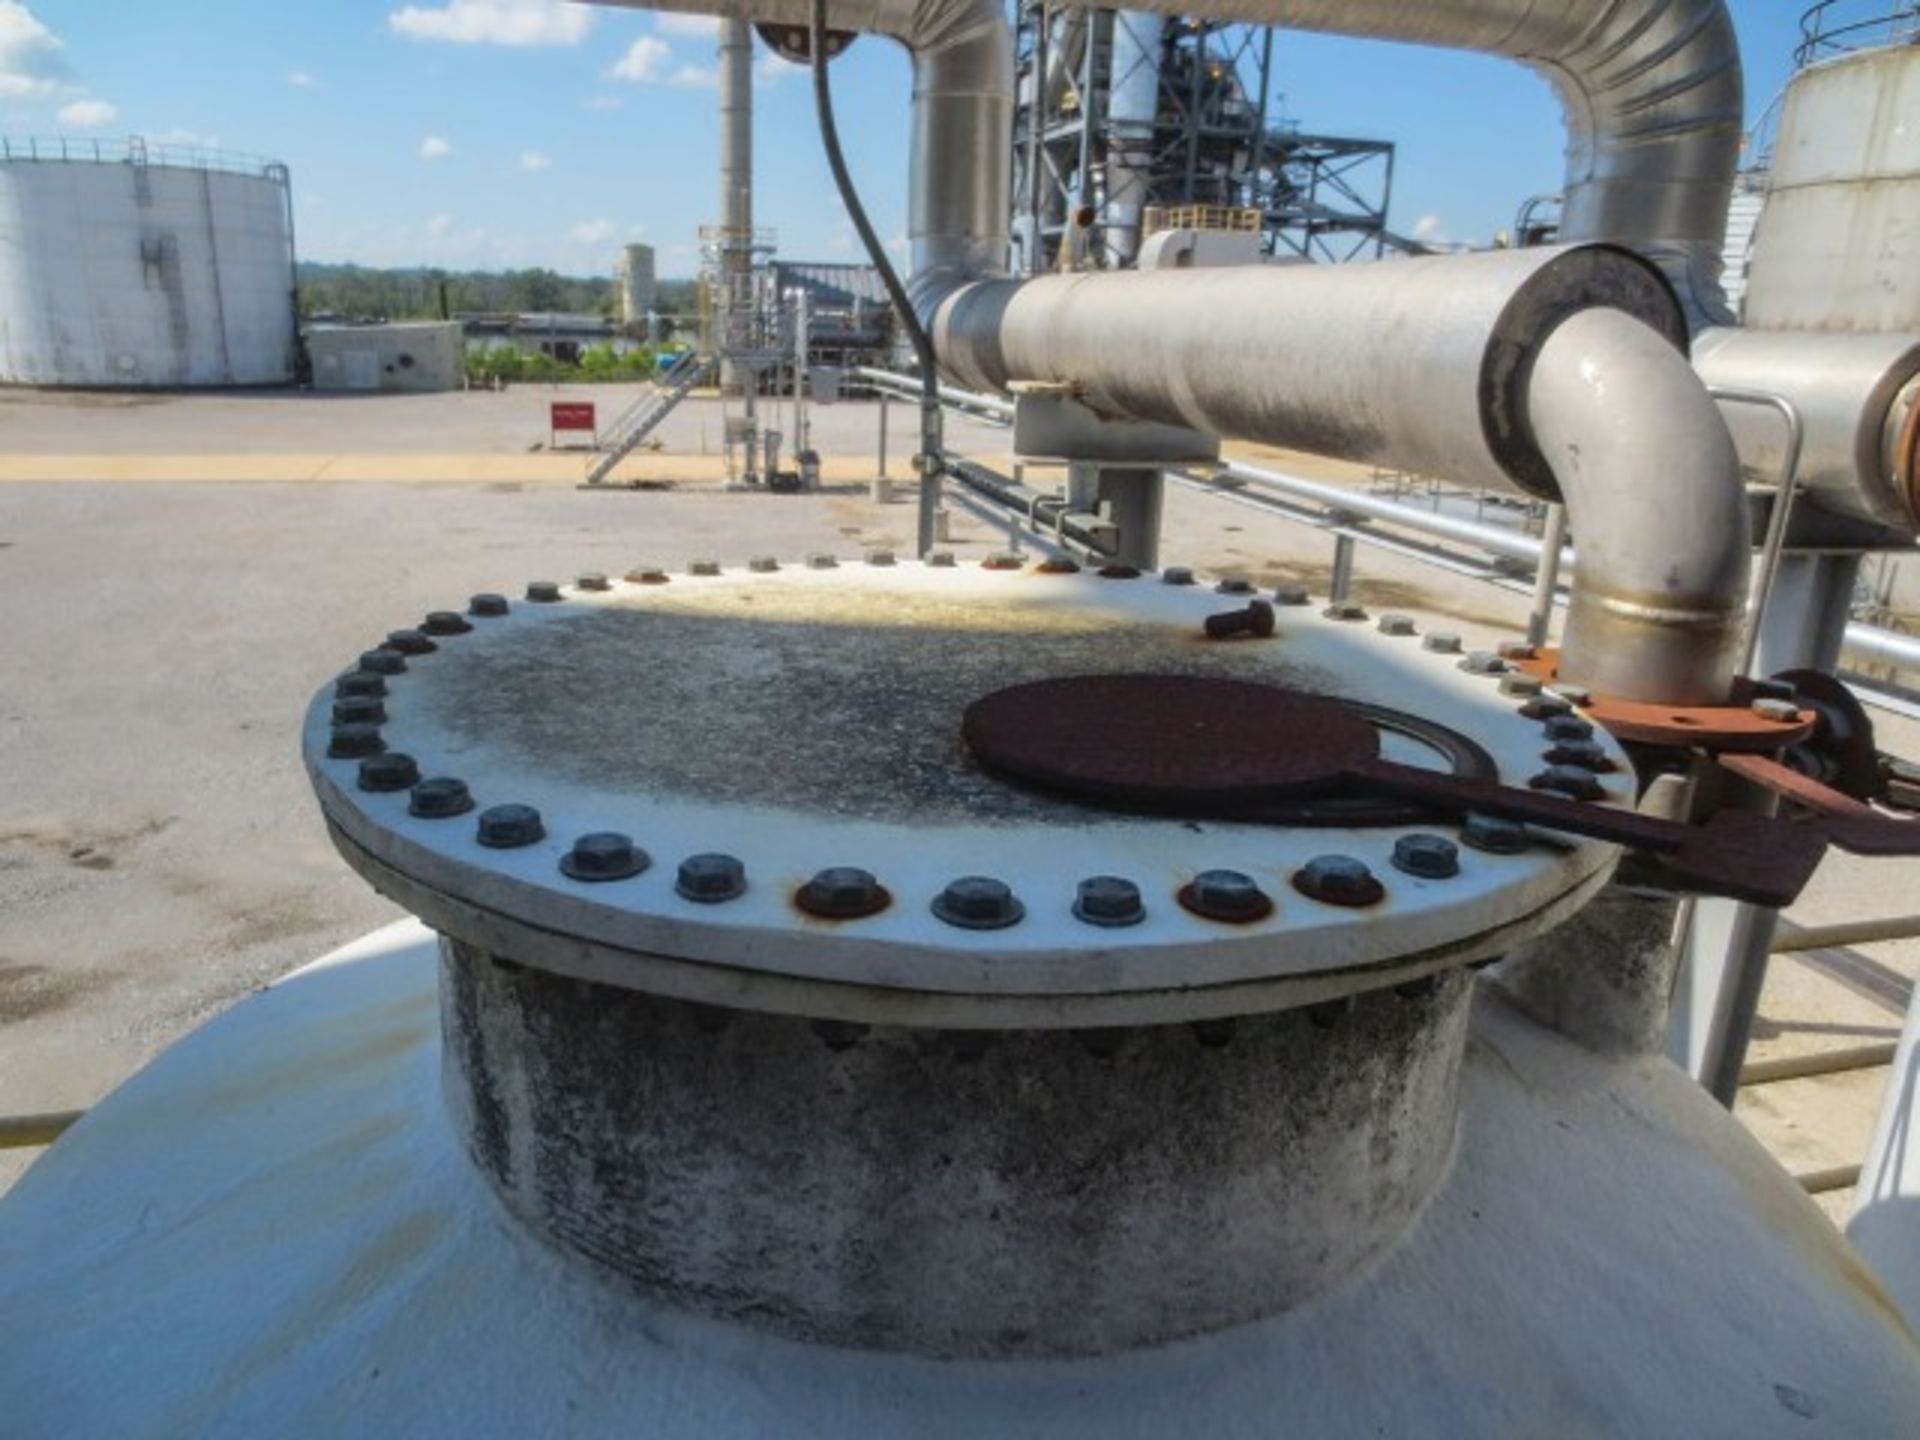 Biogas scrubber, material carbon steel, CALL for Quote - Image 2 of 3